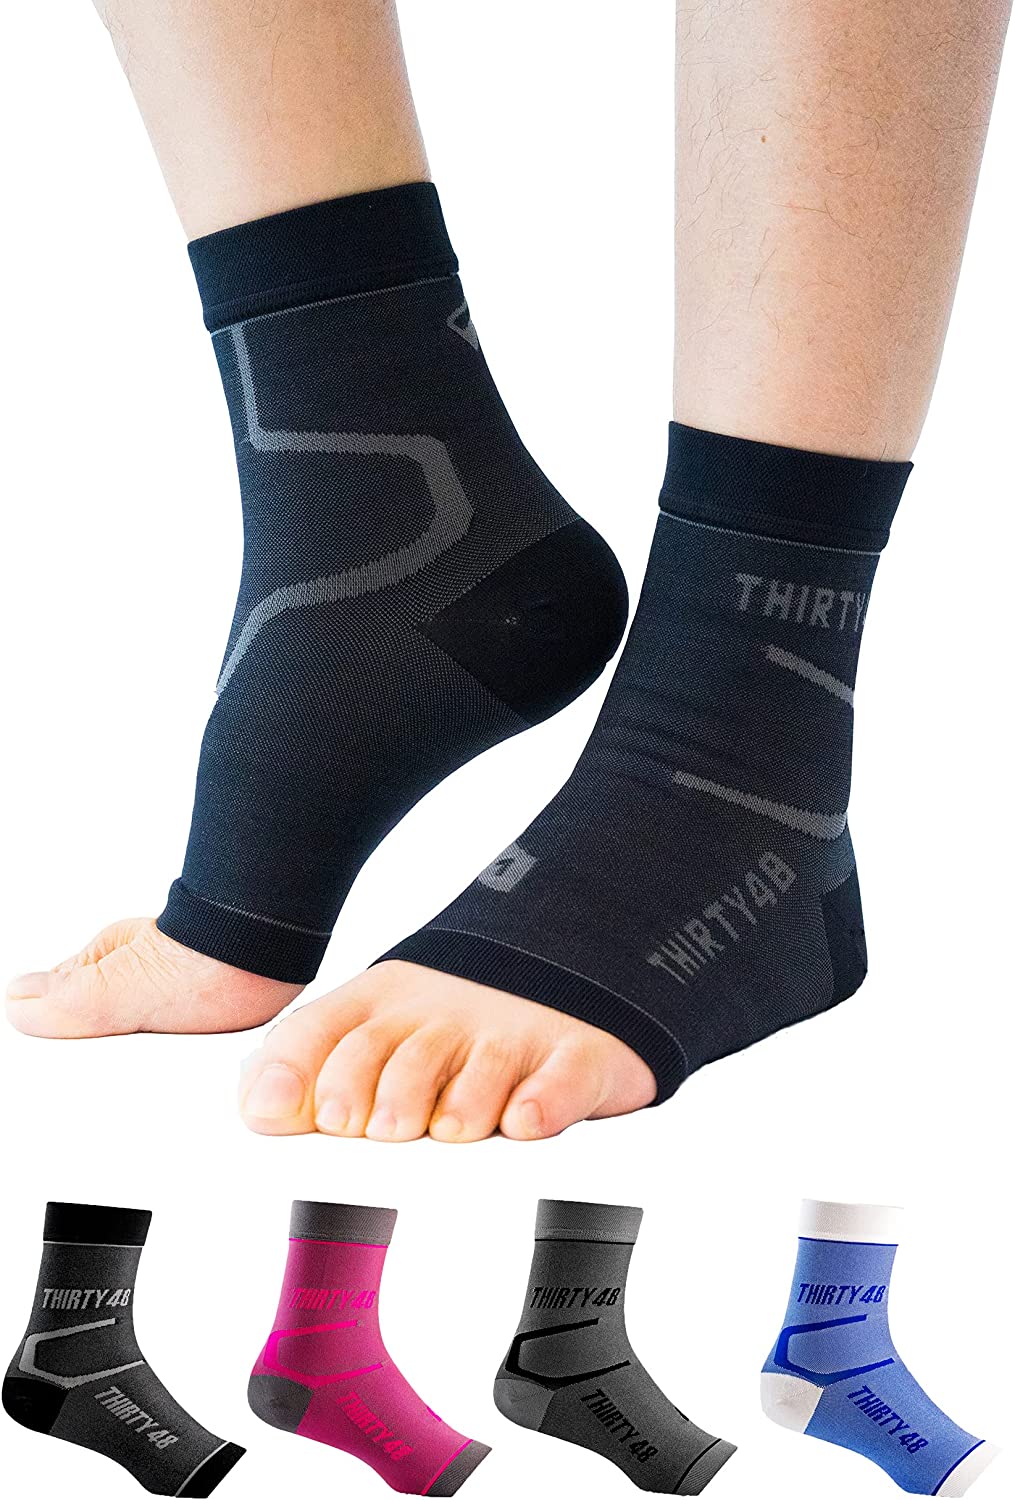 Thirty48 Targeted Ribbing Ankle Compression Sleeves, 1-Pair